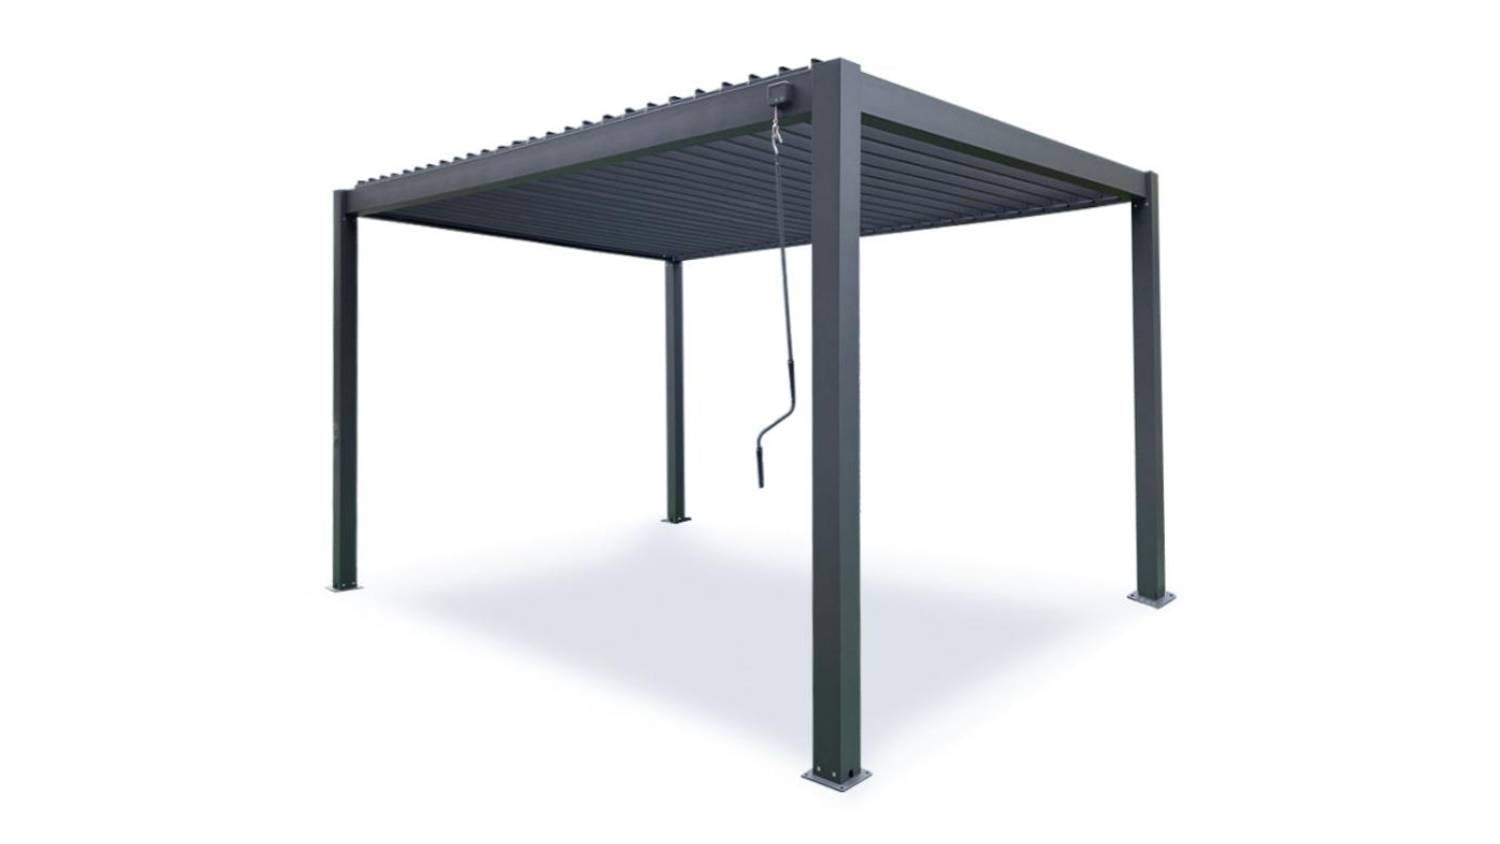 TSB Living Louvre Roof Pergola with Drainage 3 x 3m - Grey